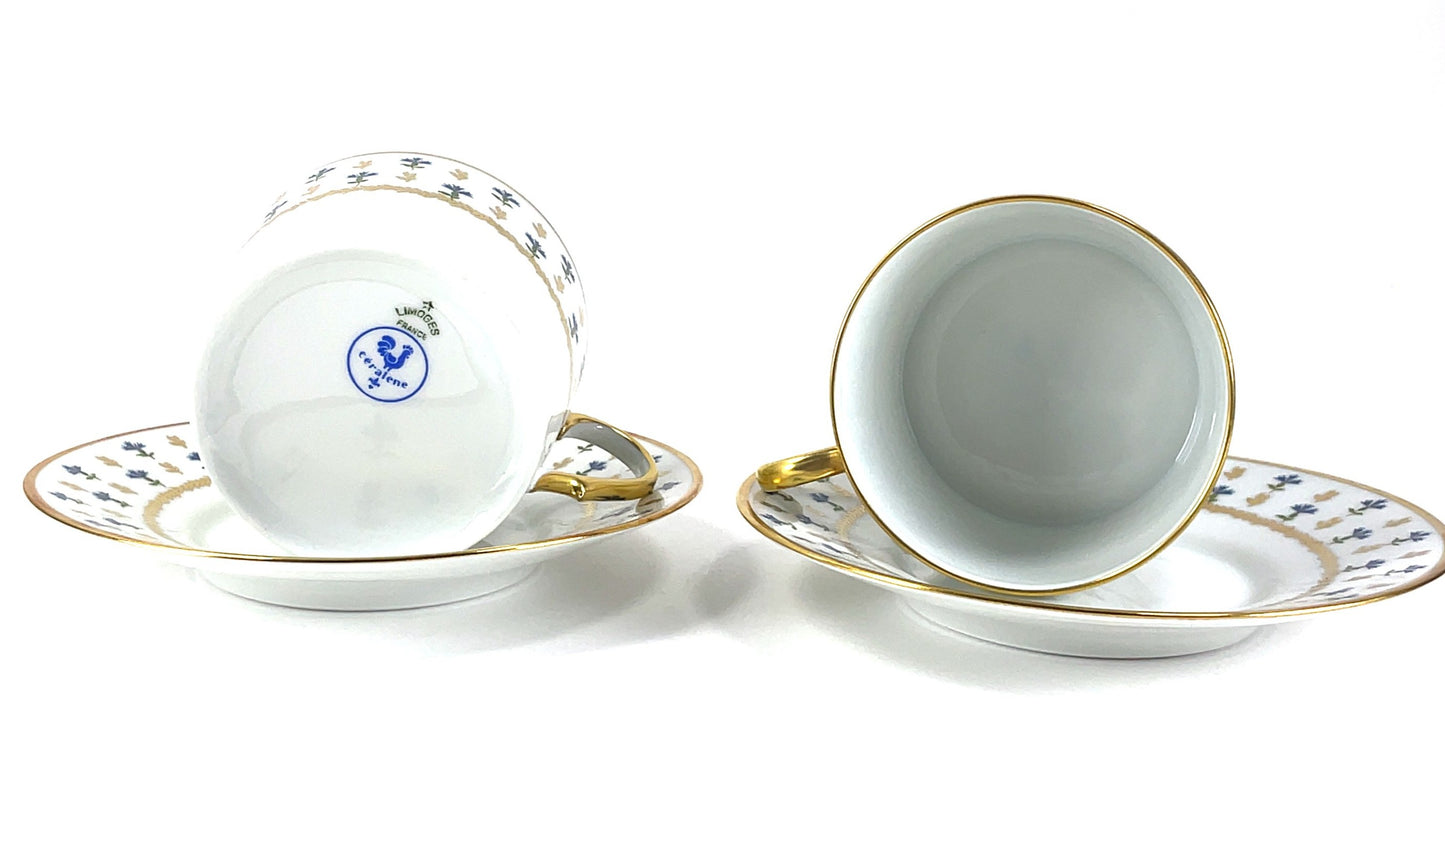 2 x Limoges France Raynaud Vieux-Nyon by Ceralene Cup and Saucer